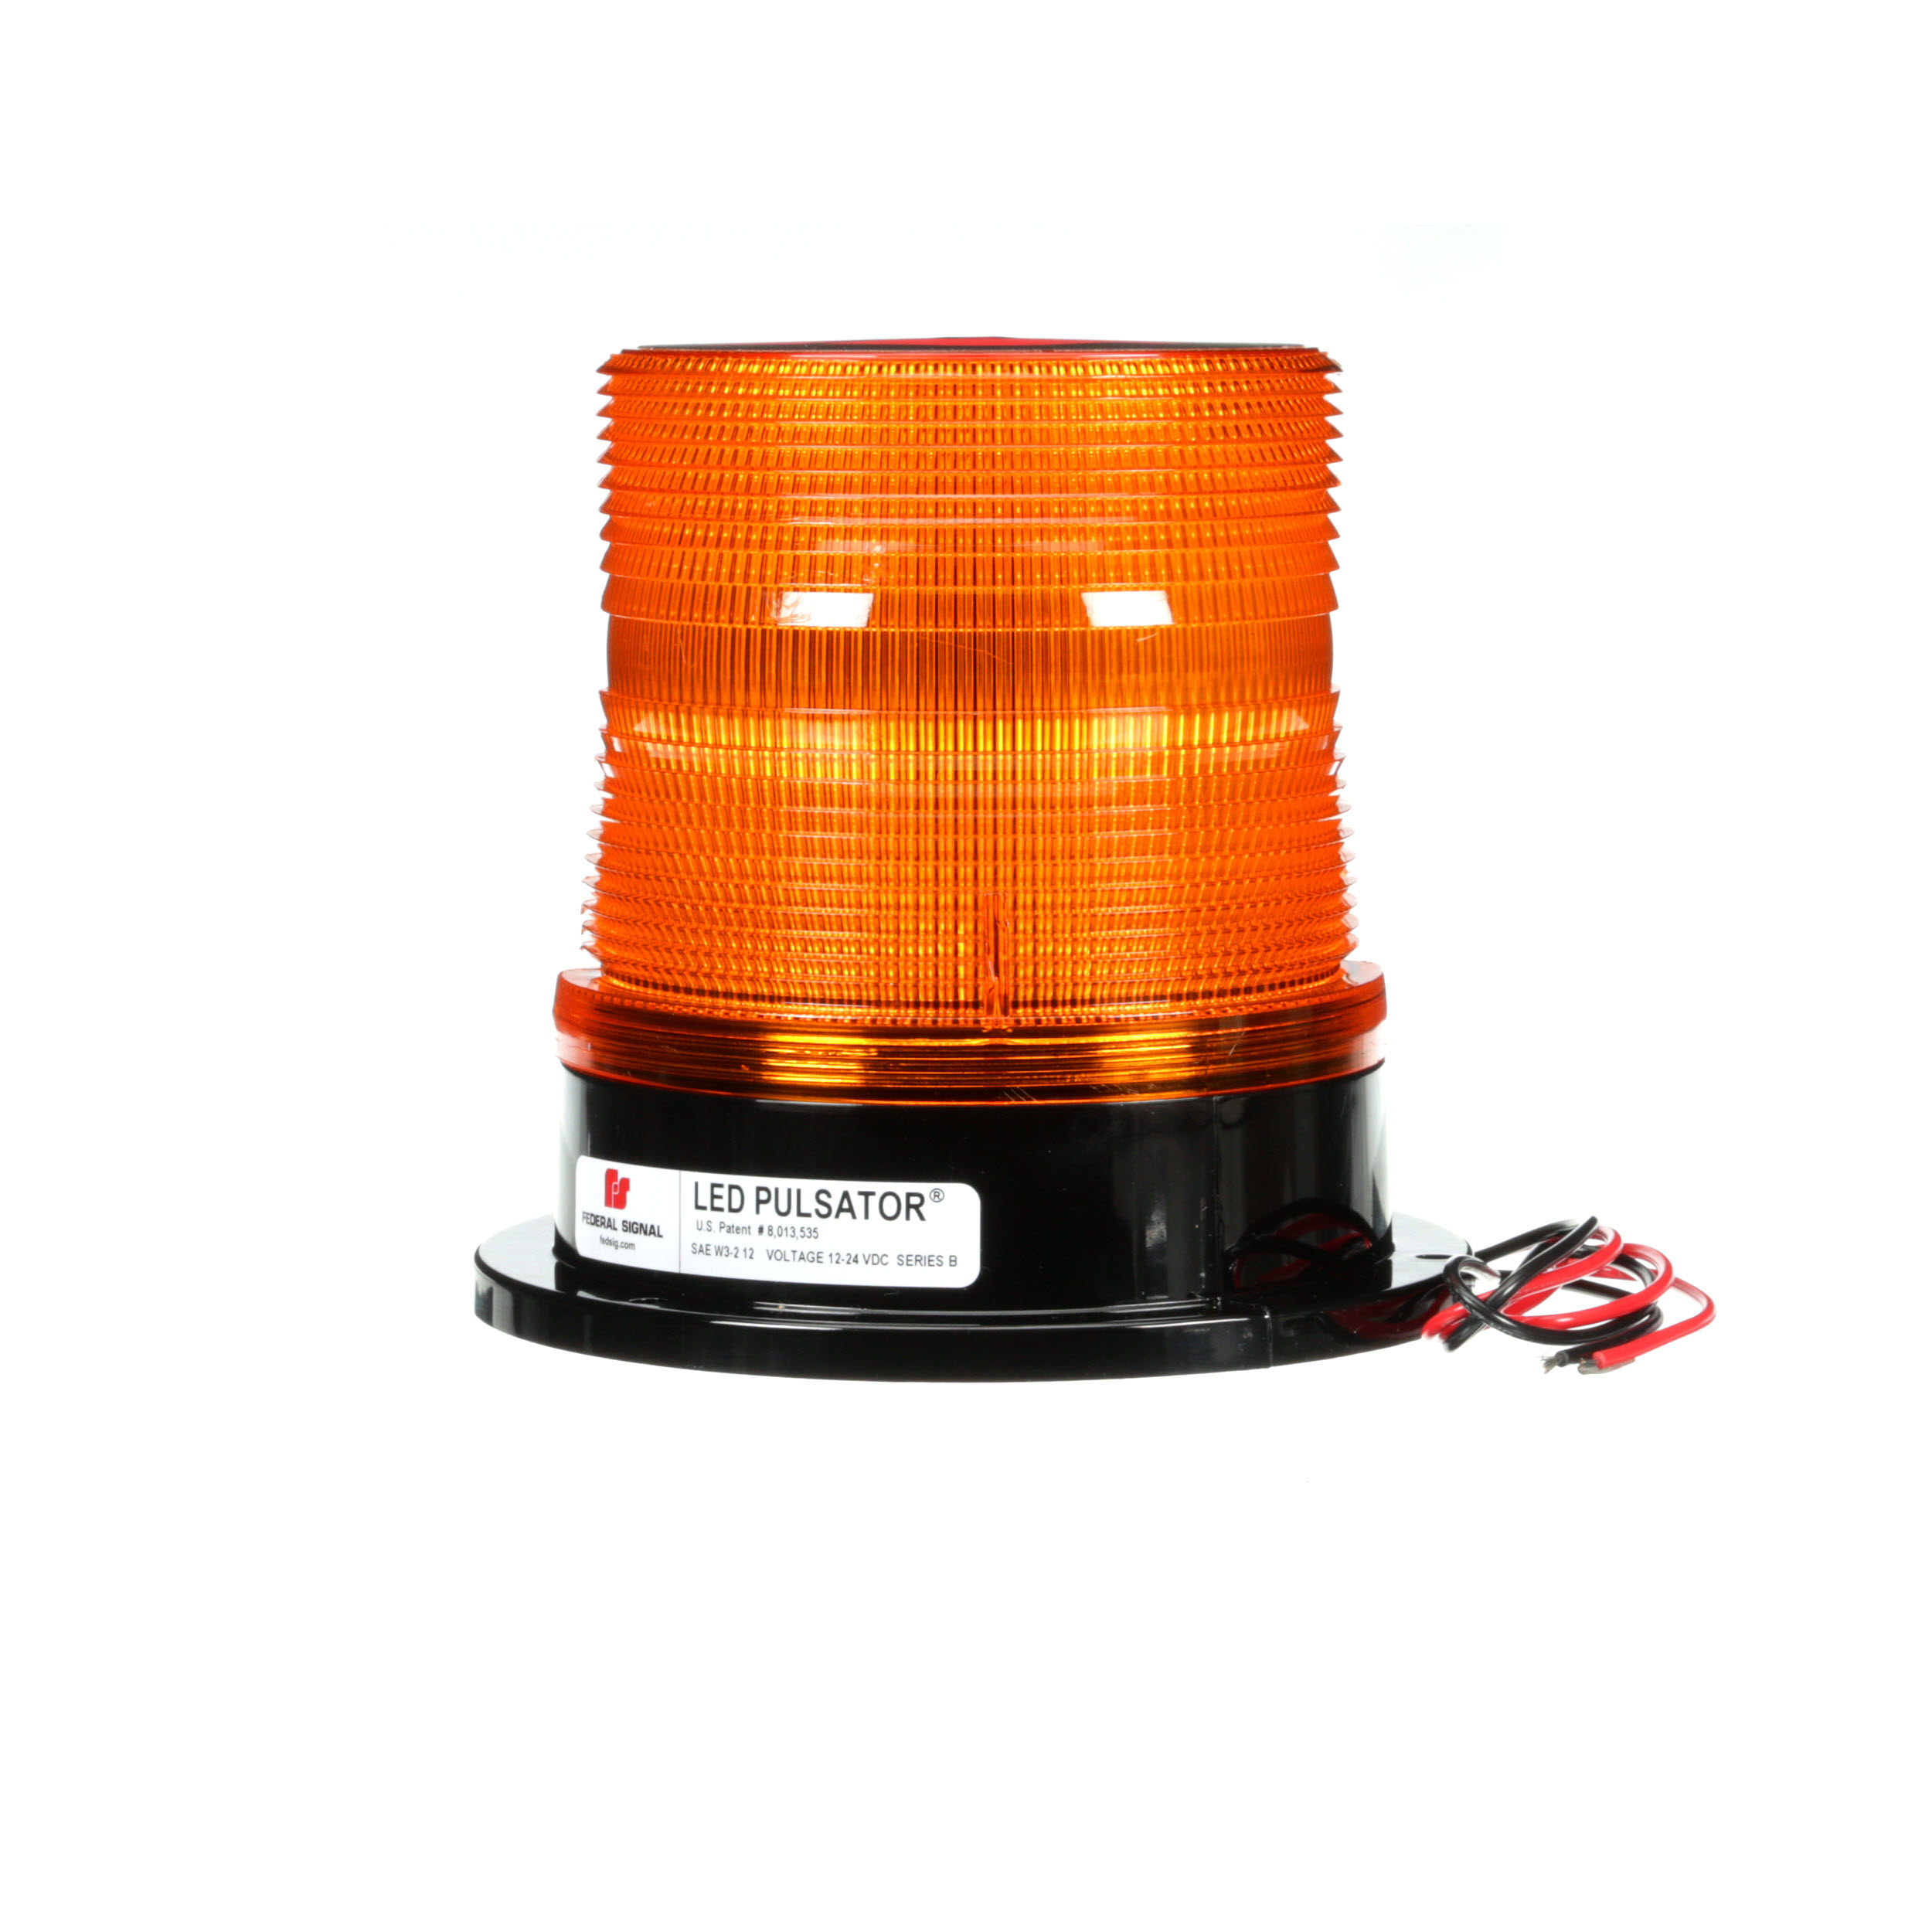 Permanent Mount with Amber Dome Federal Signal 211823-02 Pulsator 451 Plus Low Profile Strobe Beacon Class 2 